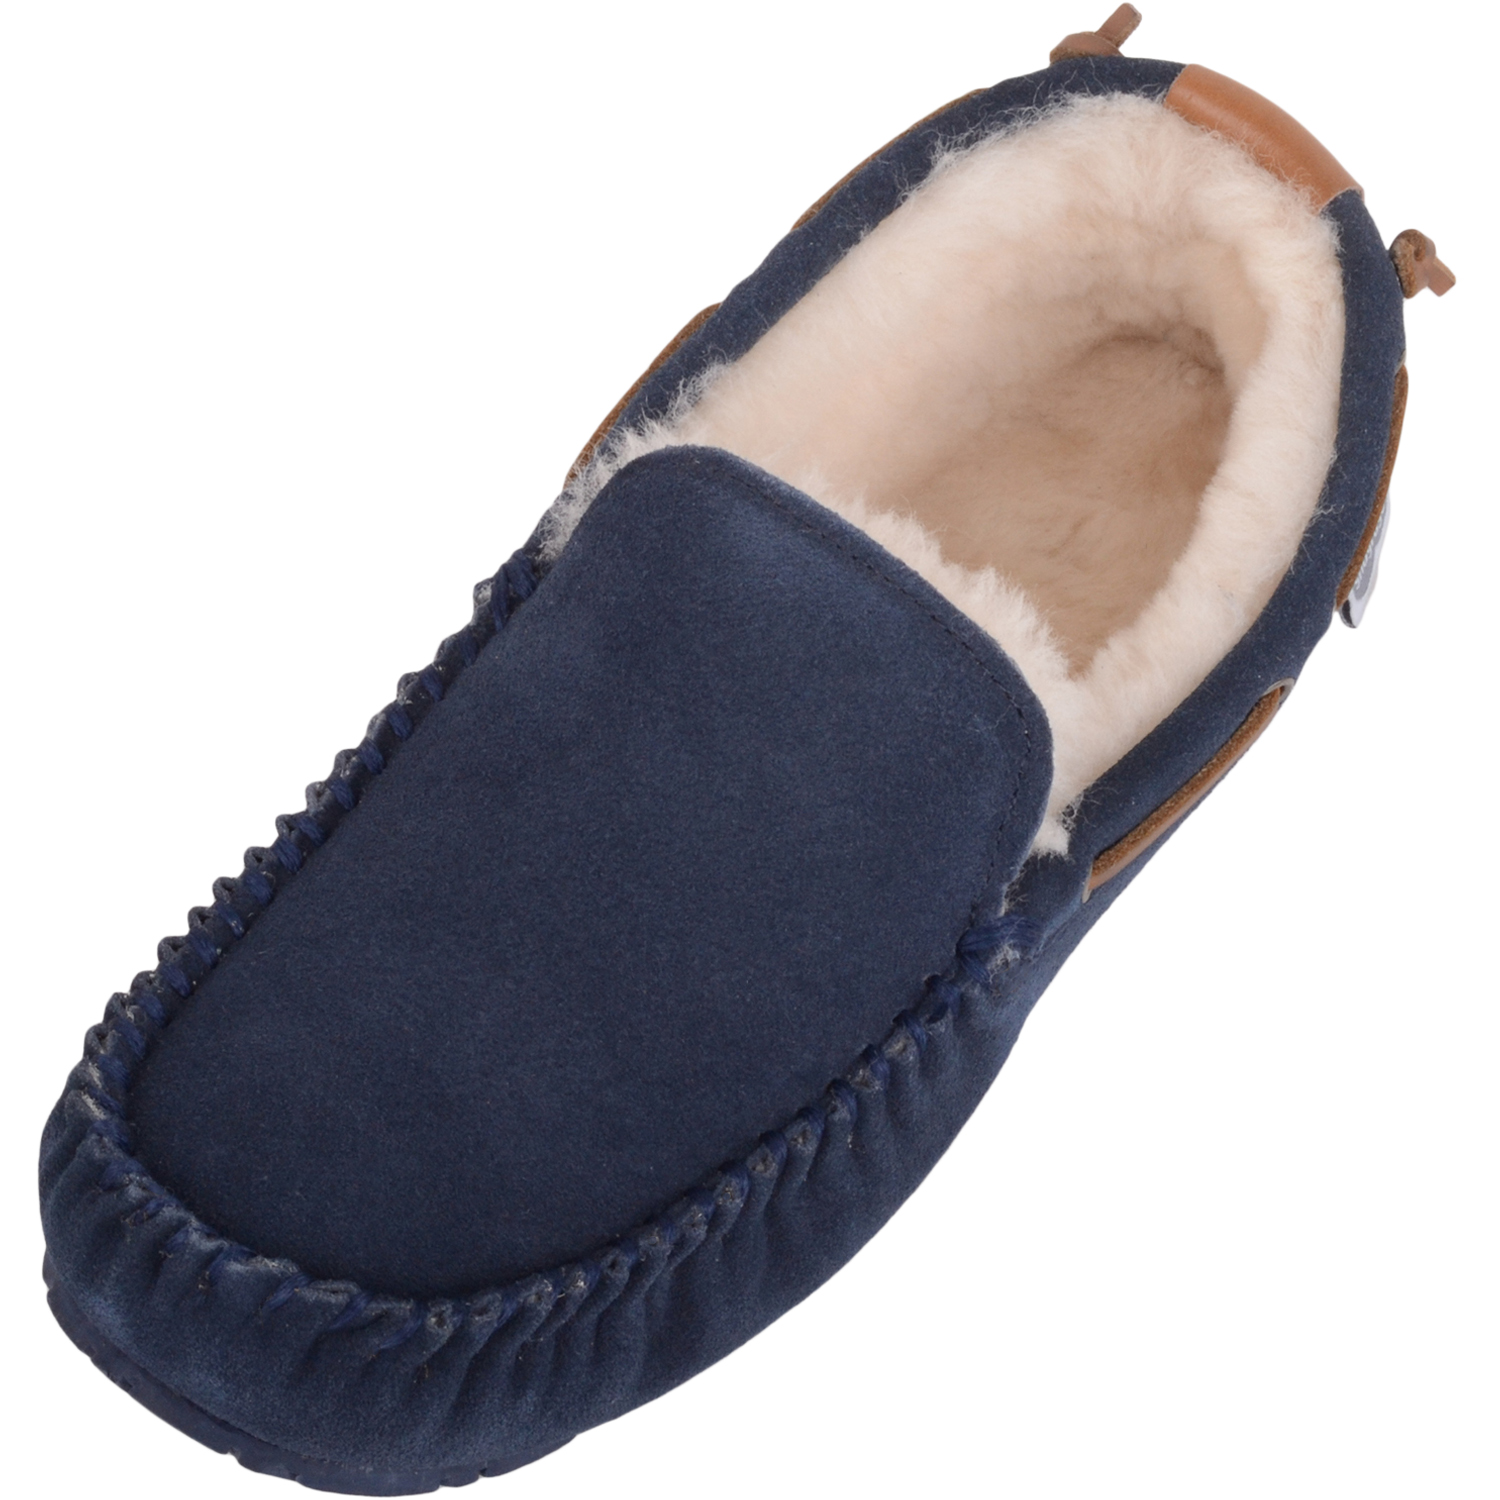 The North Face slippers: Are they worth the hype? | The Independent